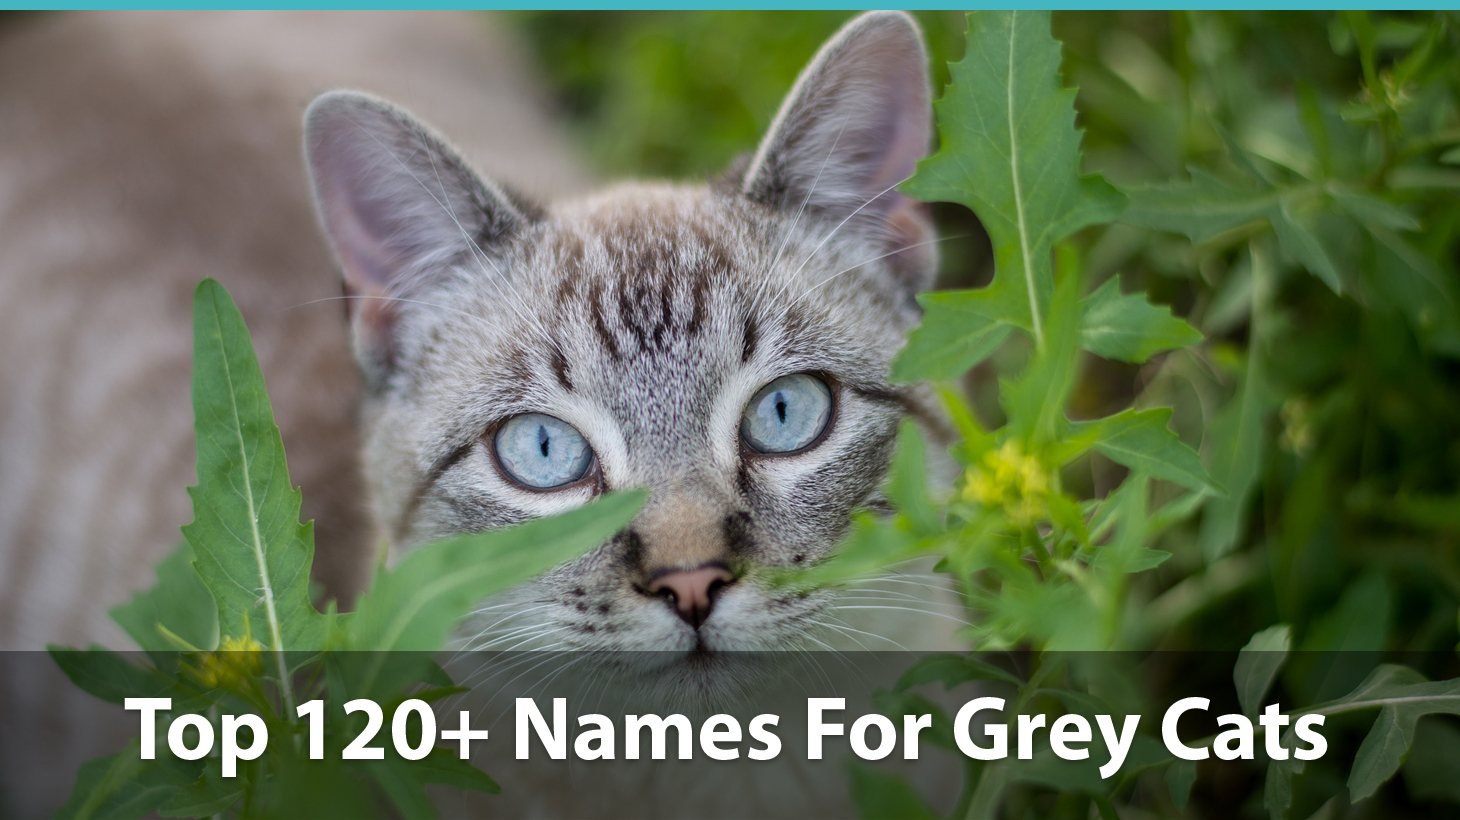 Top 120+ Names For Grey Cats (Cute, Funny, Unique, Puns, And More!)